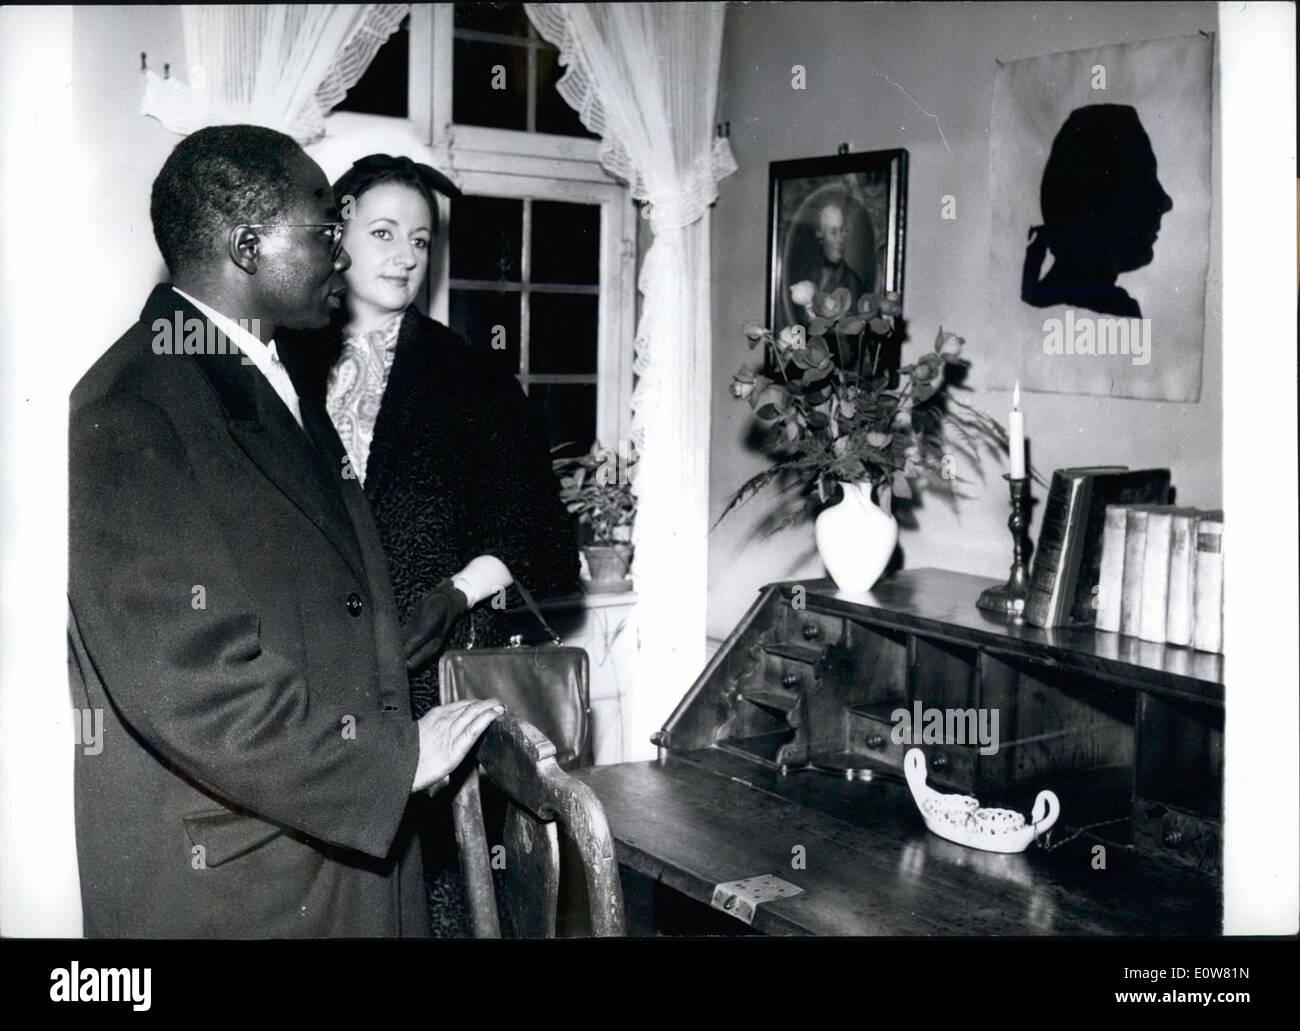 Nov. 11, 1961 - President Senghor visits the Frankfurt Goethahouse President SENGHOR of Senegal,who made an official Visit to West.Germany, visited- the famous Goethe House, in Frankfurt today before he left for Paris /-.-Senghur, who is a great Goethe lover stopped for a lung, time at the desk where foethe worked.with his is his french born wife Stock Photo